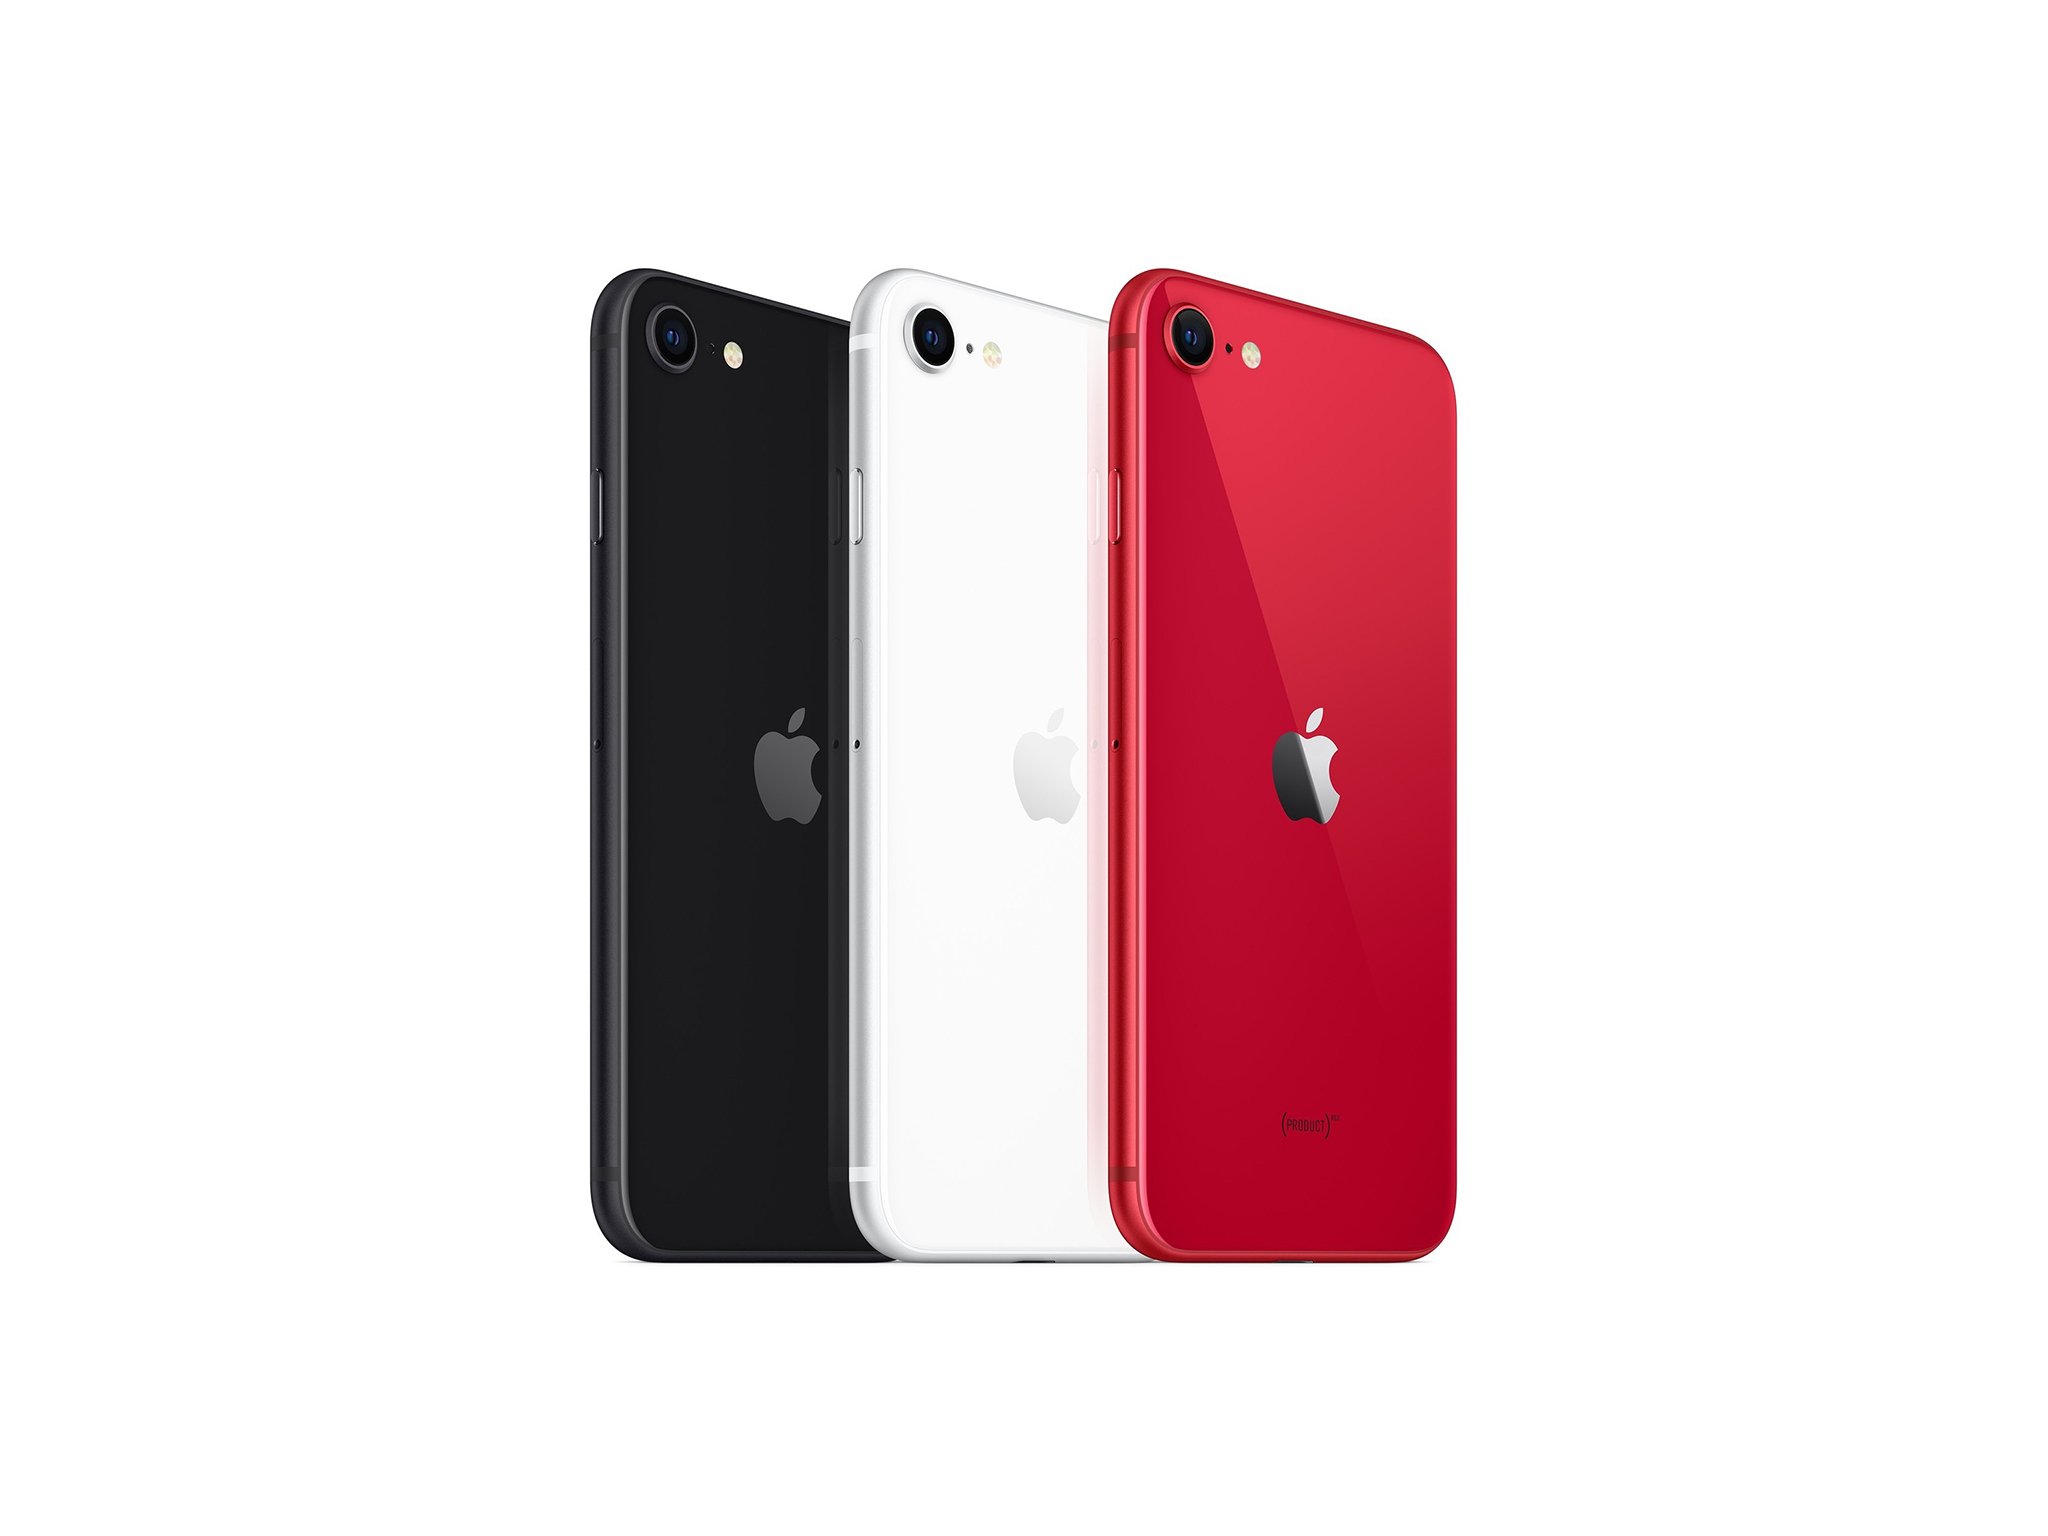 The new iPhone SE (2020) in red, white, and black